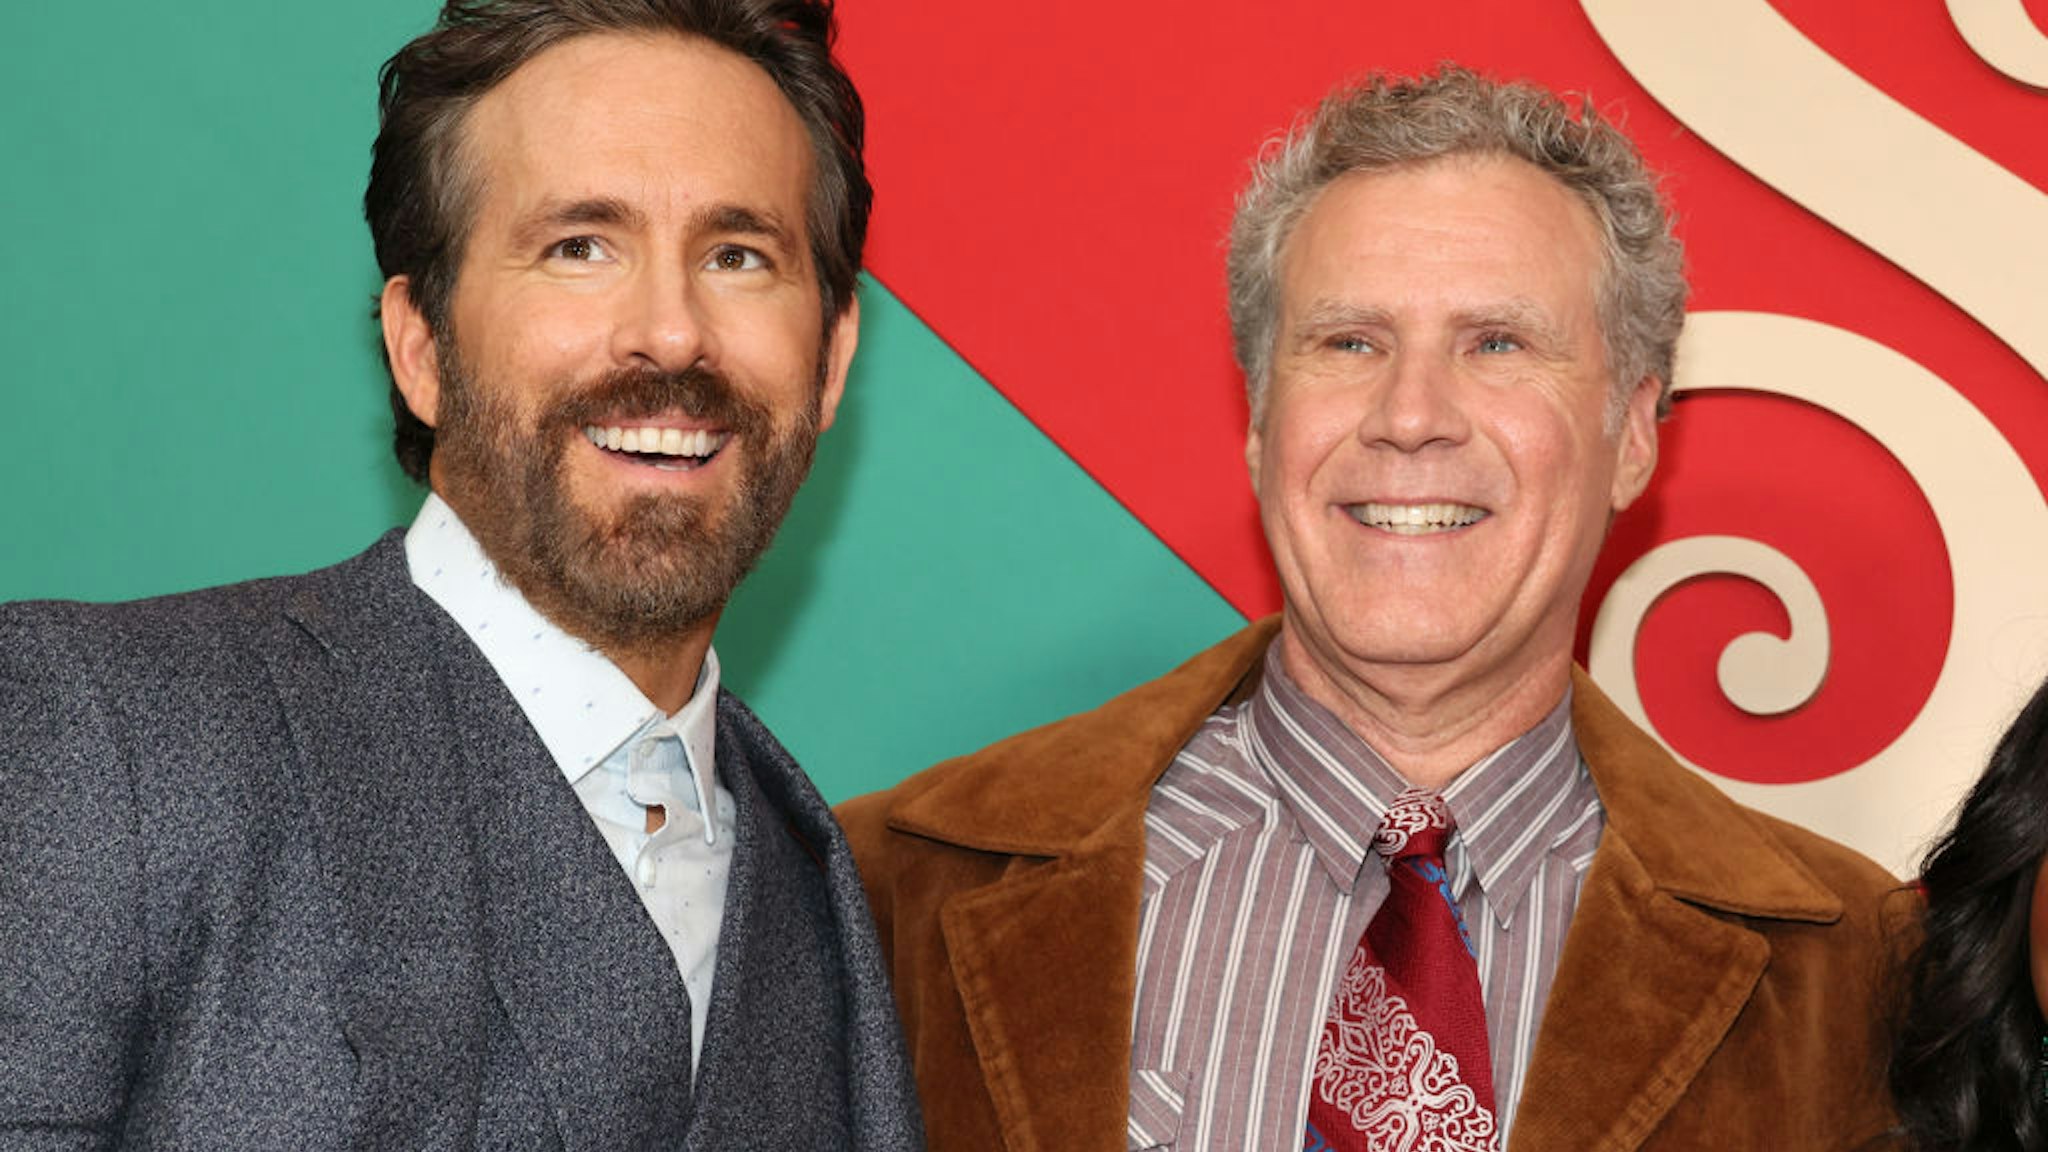 NEW YORK, NEW YORK - NOVEMBER 07: Ryan Reynolds and Will Ferrell attend Apple Original Film's "Spirited" New York Red Carpet at Alice Tully Hall, Lincoln Center on November 07, 2022 in New York City. (Photo by Dia Dipasupil/GA/The Hollywood Reporter via Getty Images,)